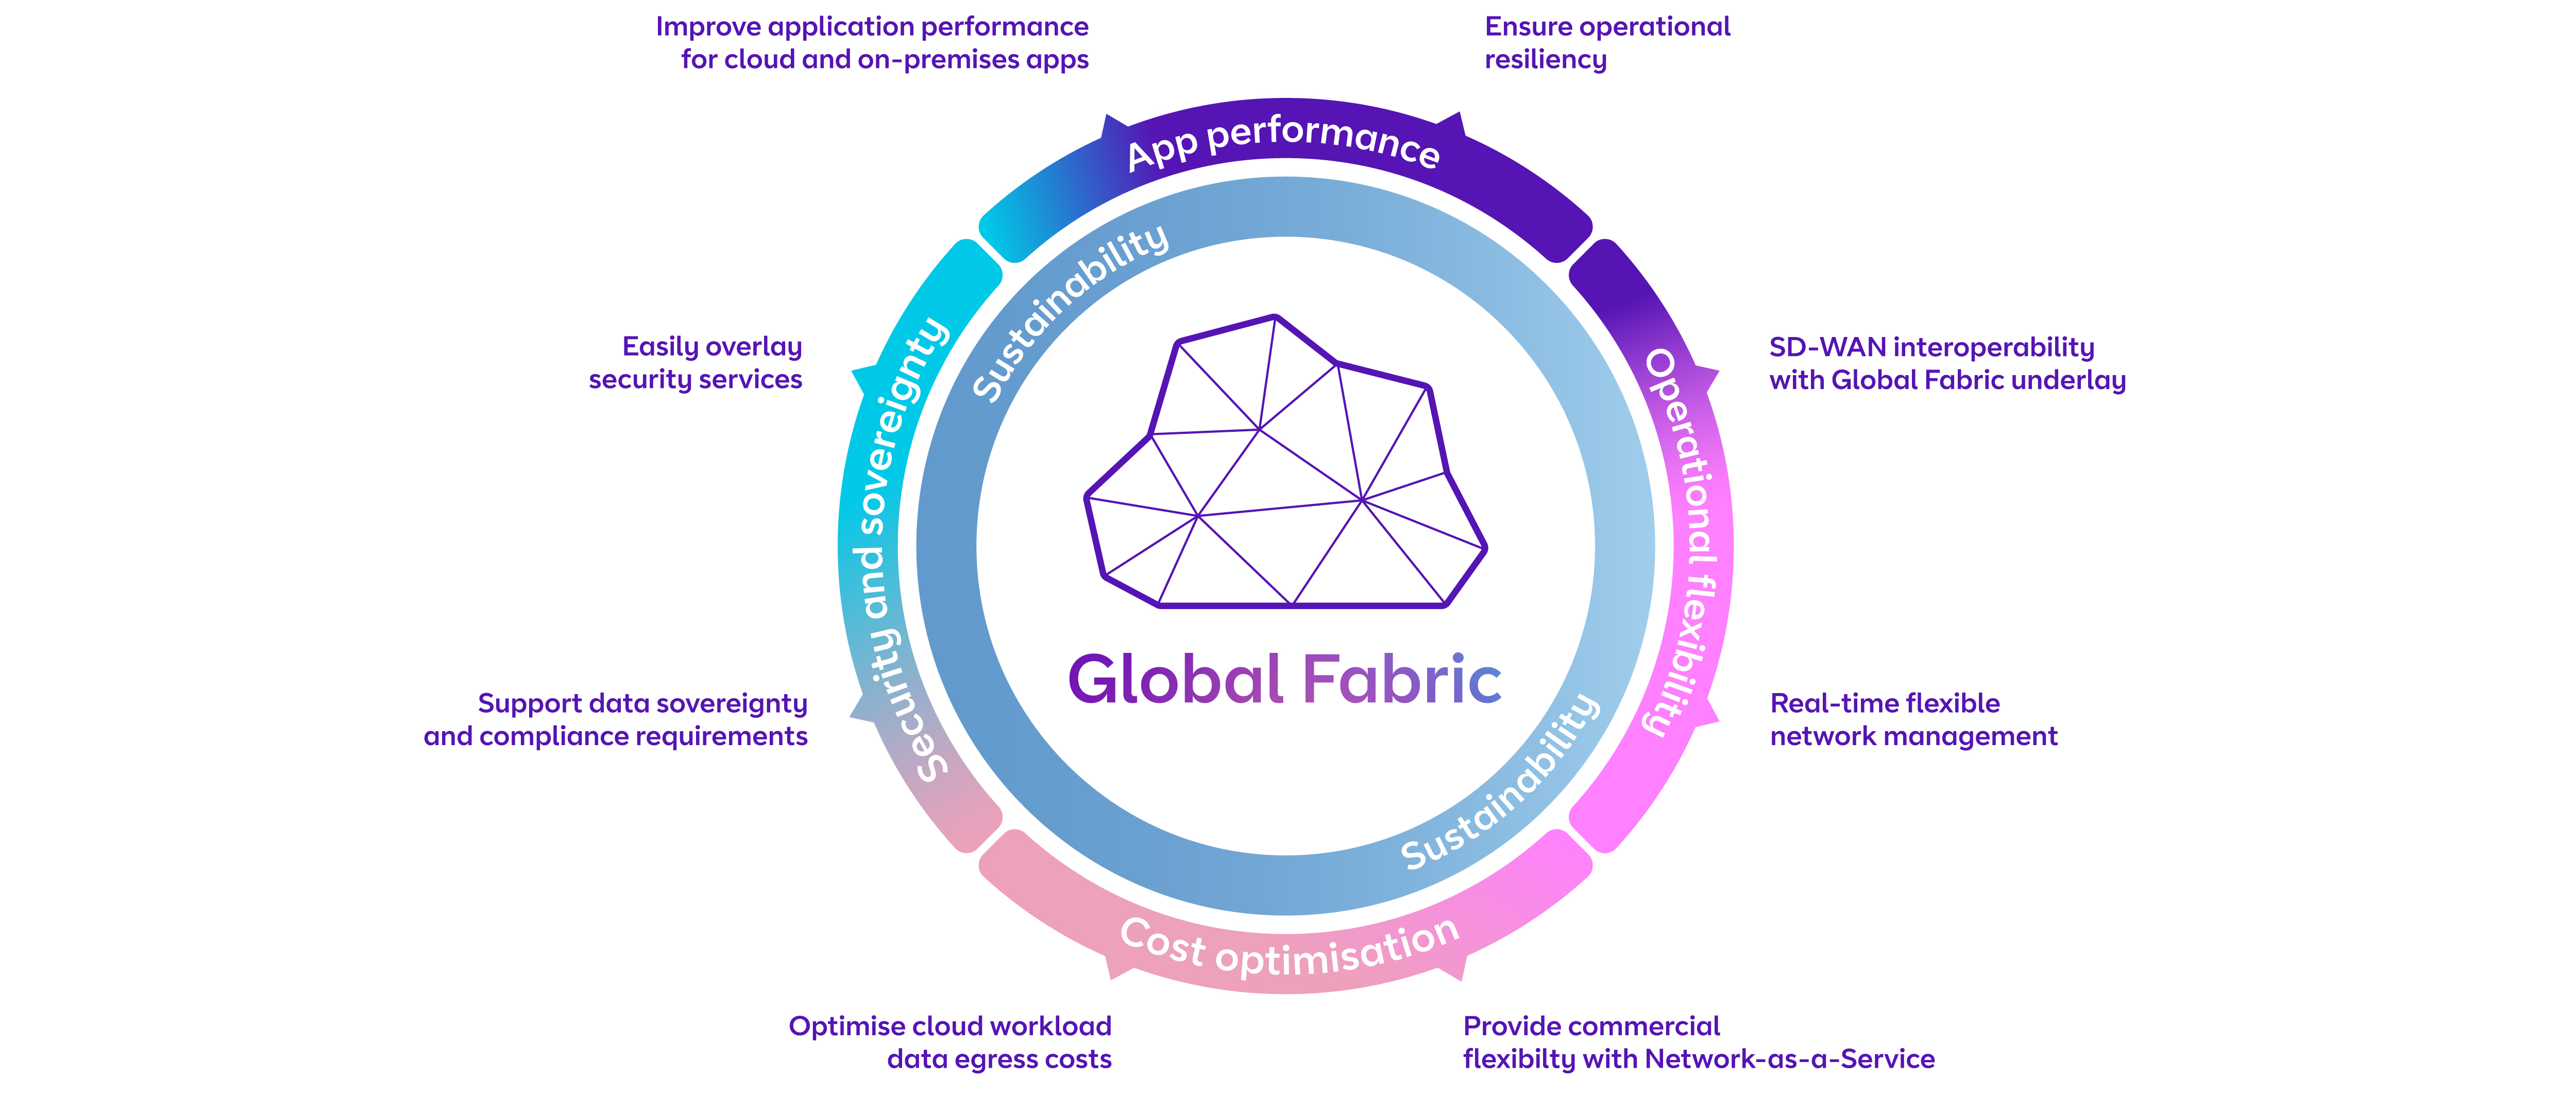 The key benefits of Global Fabric